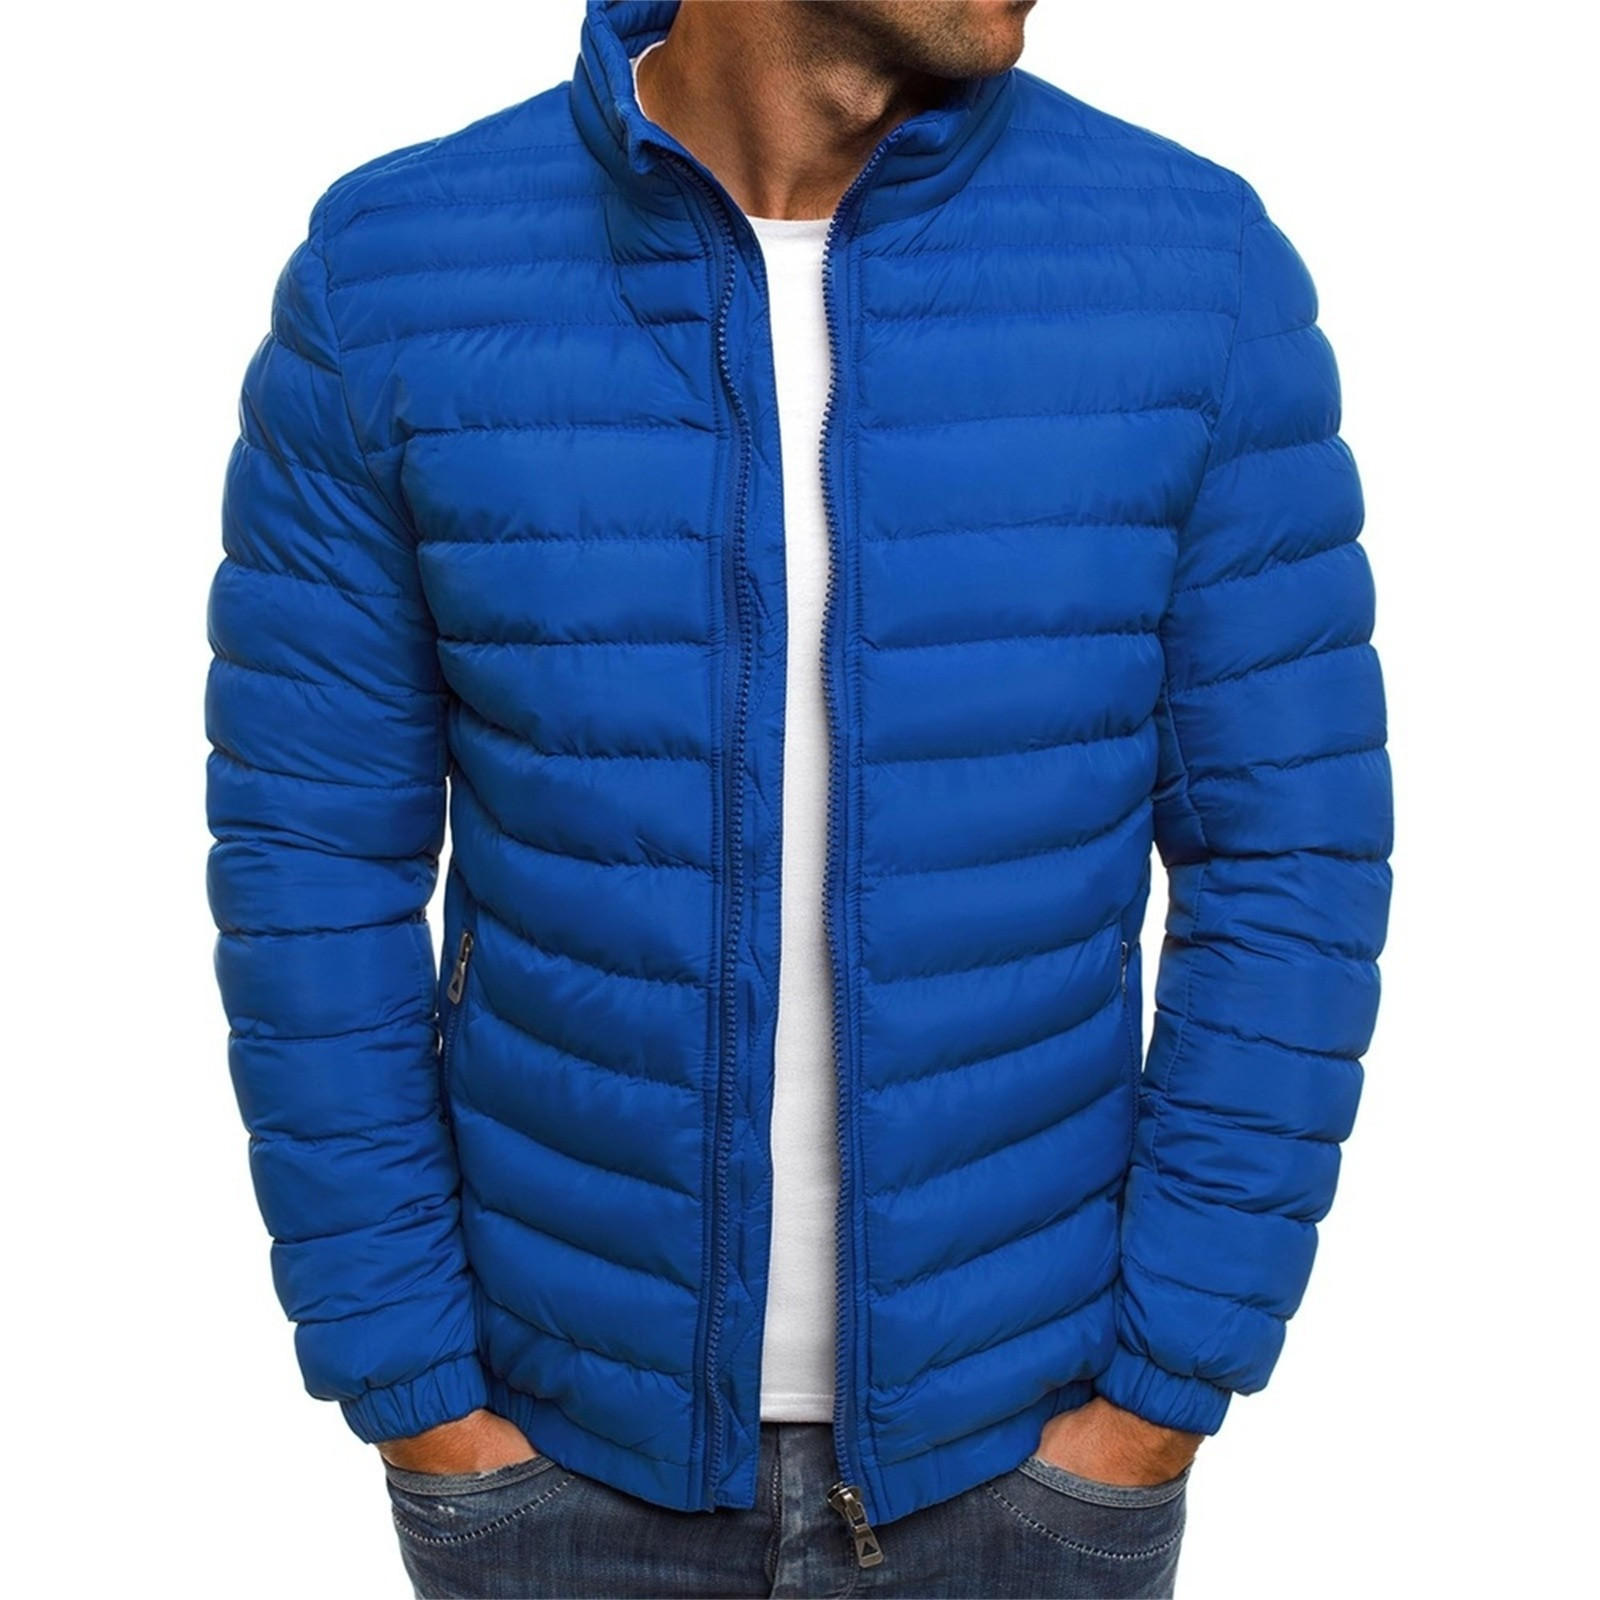 TIHLMK Down Jacket Sales Clearance Men's Solid Color Jacket Cotton Padded Jacket Fashion Cotton Padded Jacket Men's Warm Cotton Padded Jacket Blue - image 2 of 3